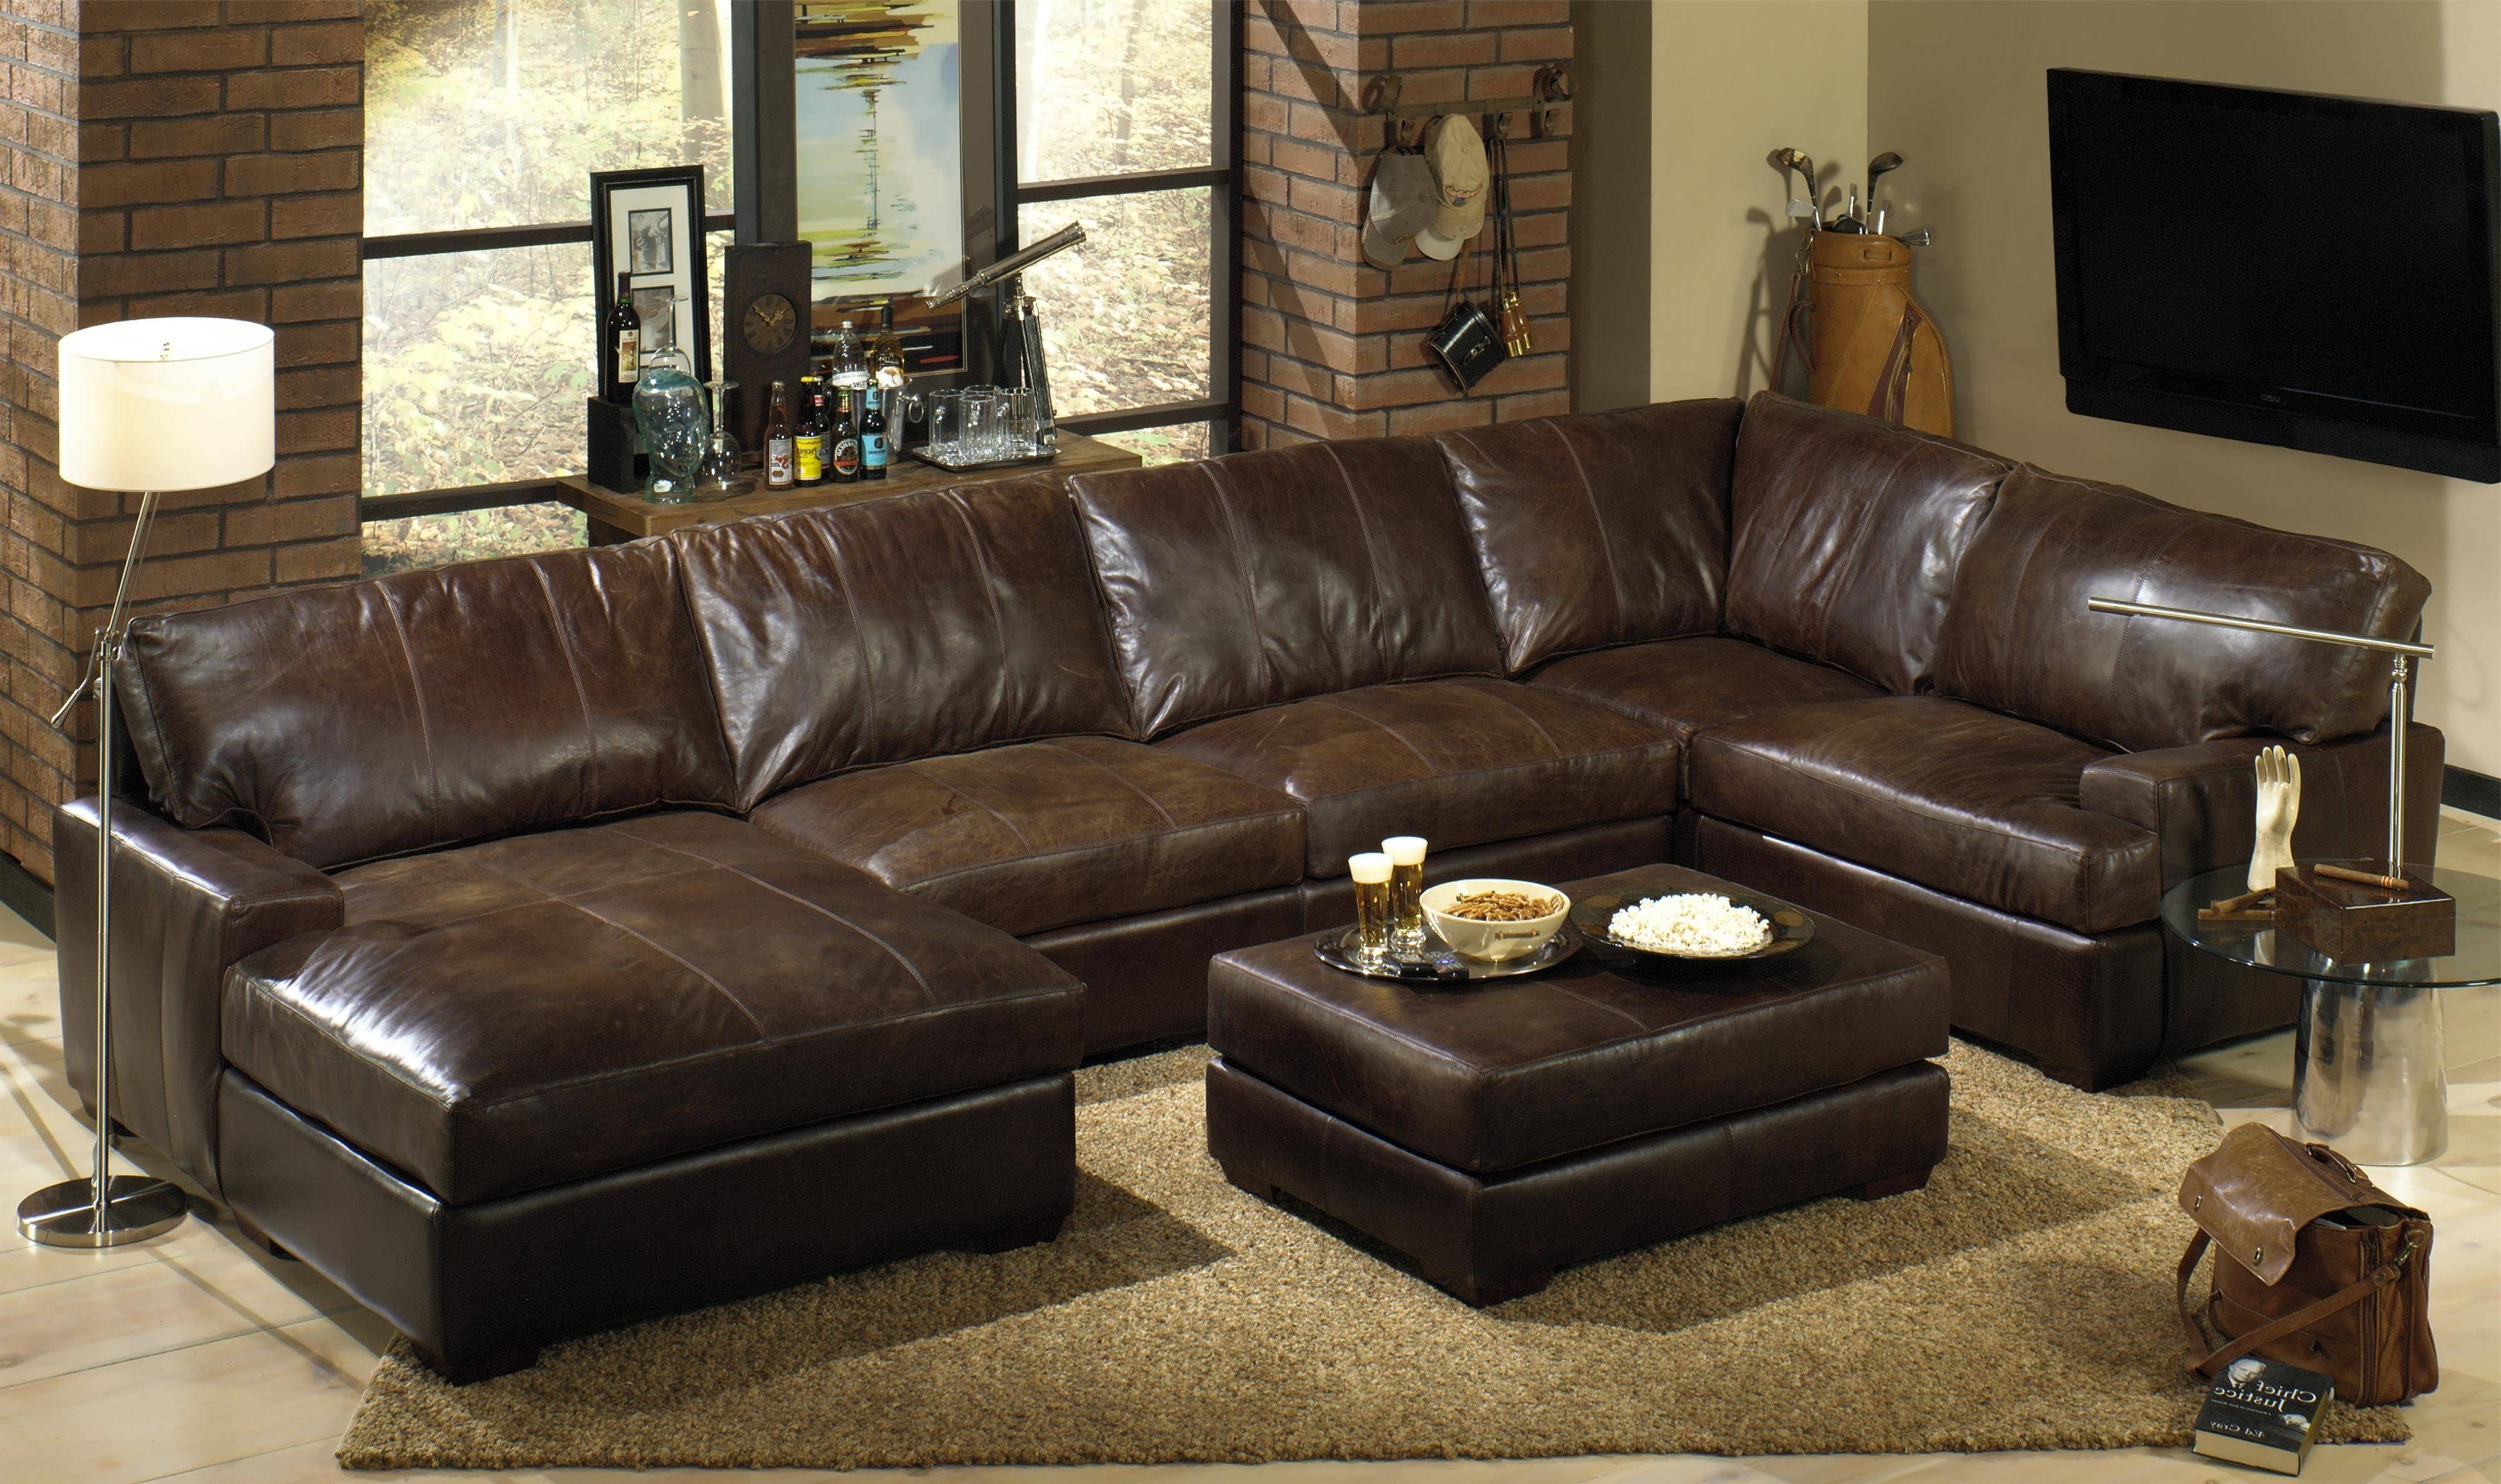 Leather Sectional Sofas With Chaise With Regard To Well Known Sofa : Small Chaise Sofa Small Leather Sectional Cheap Sectional (View 6 of 15)